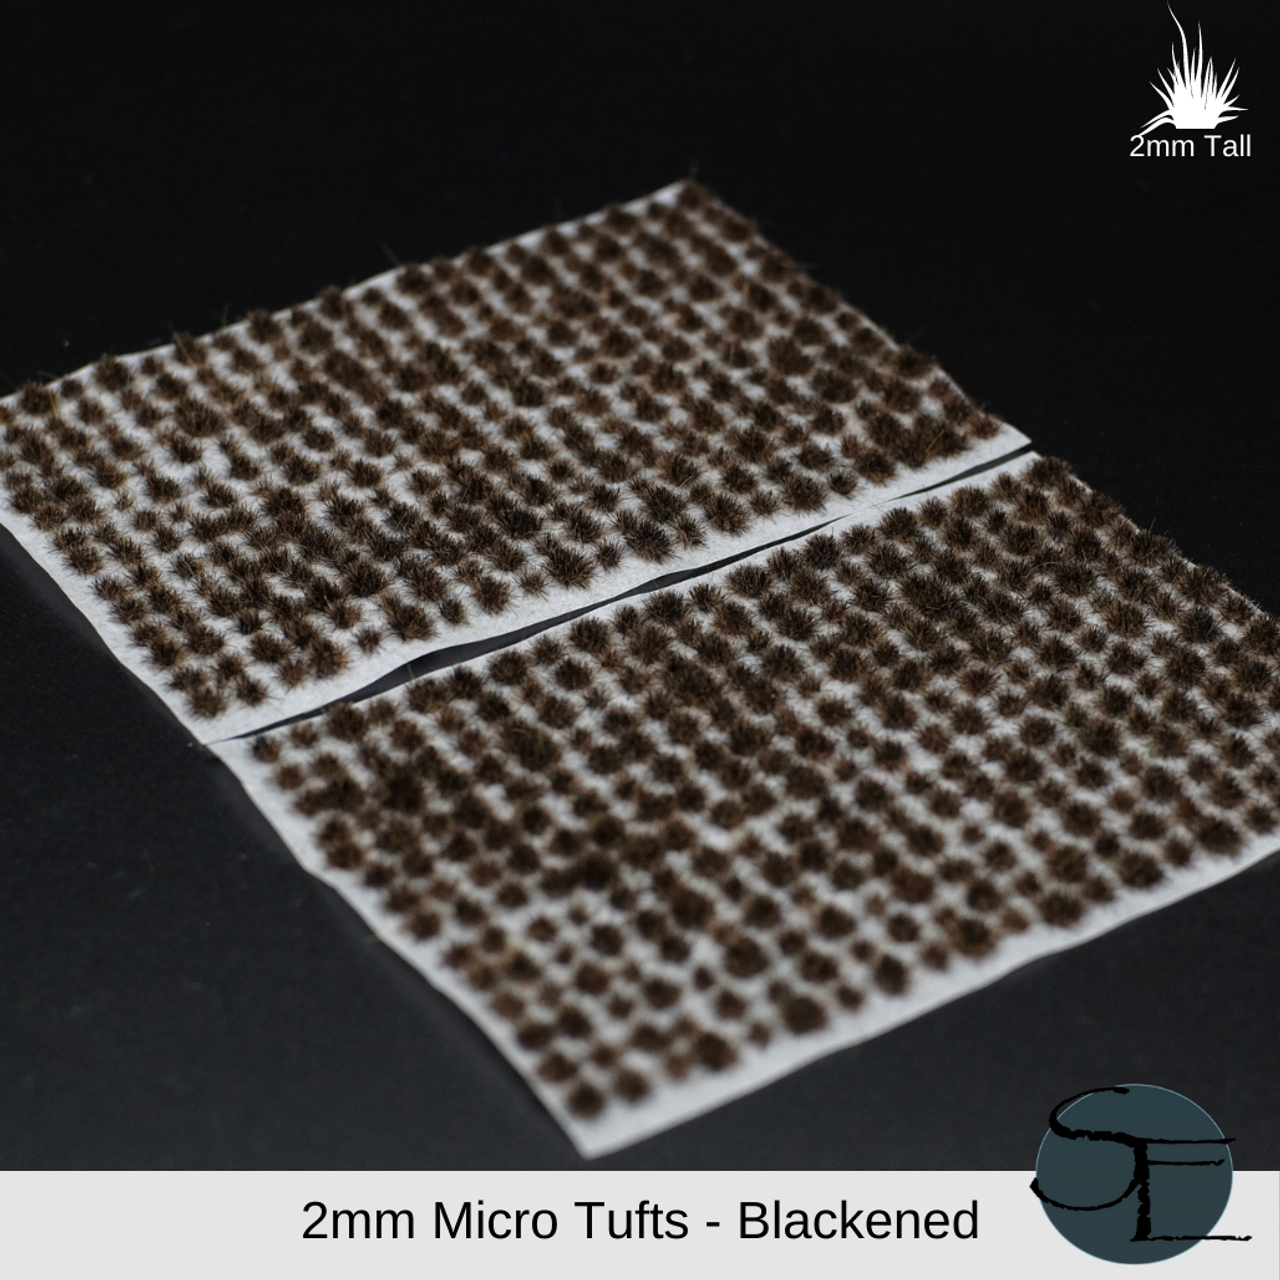 Small 2mm Static Grass Tufts Self Adhesive 28mm ACW Wargames Basing Terrain 